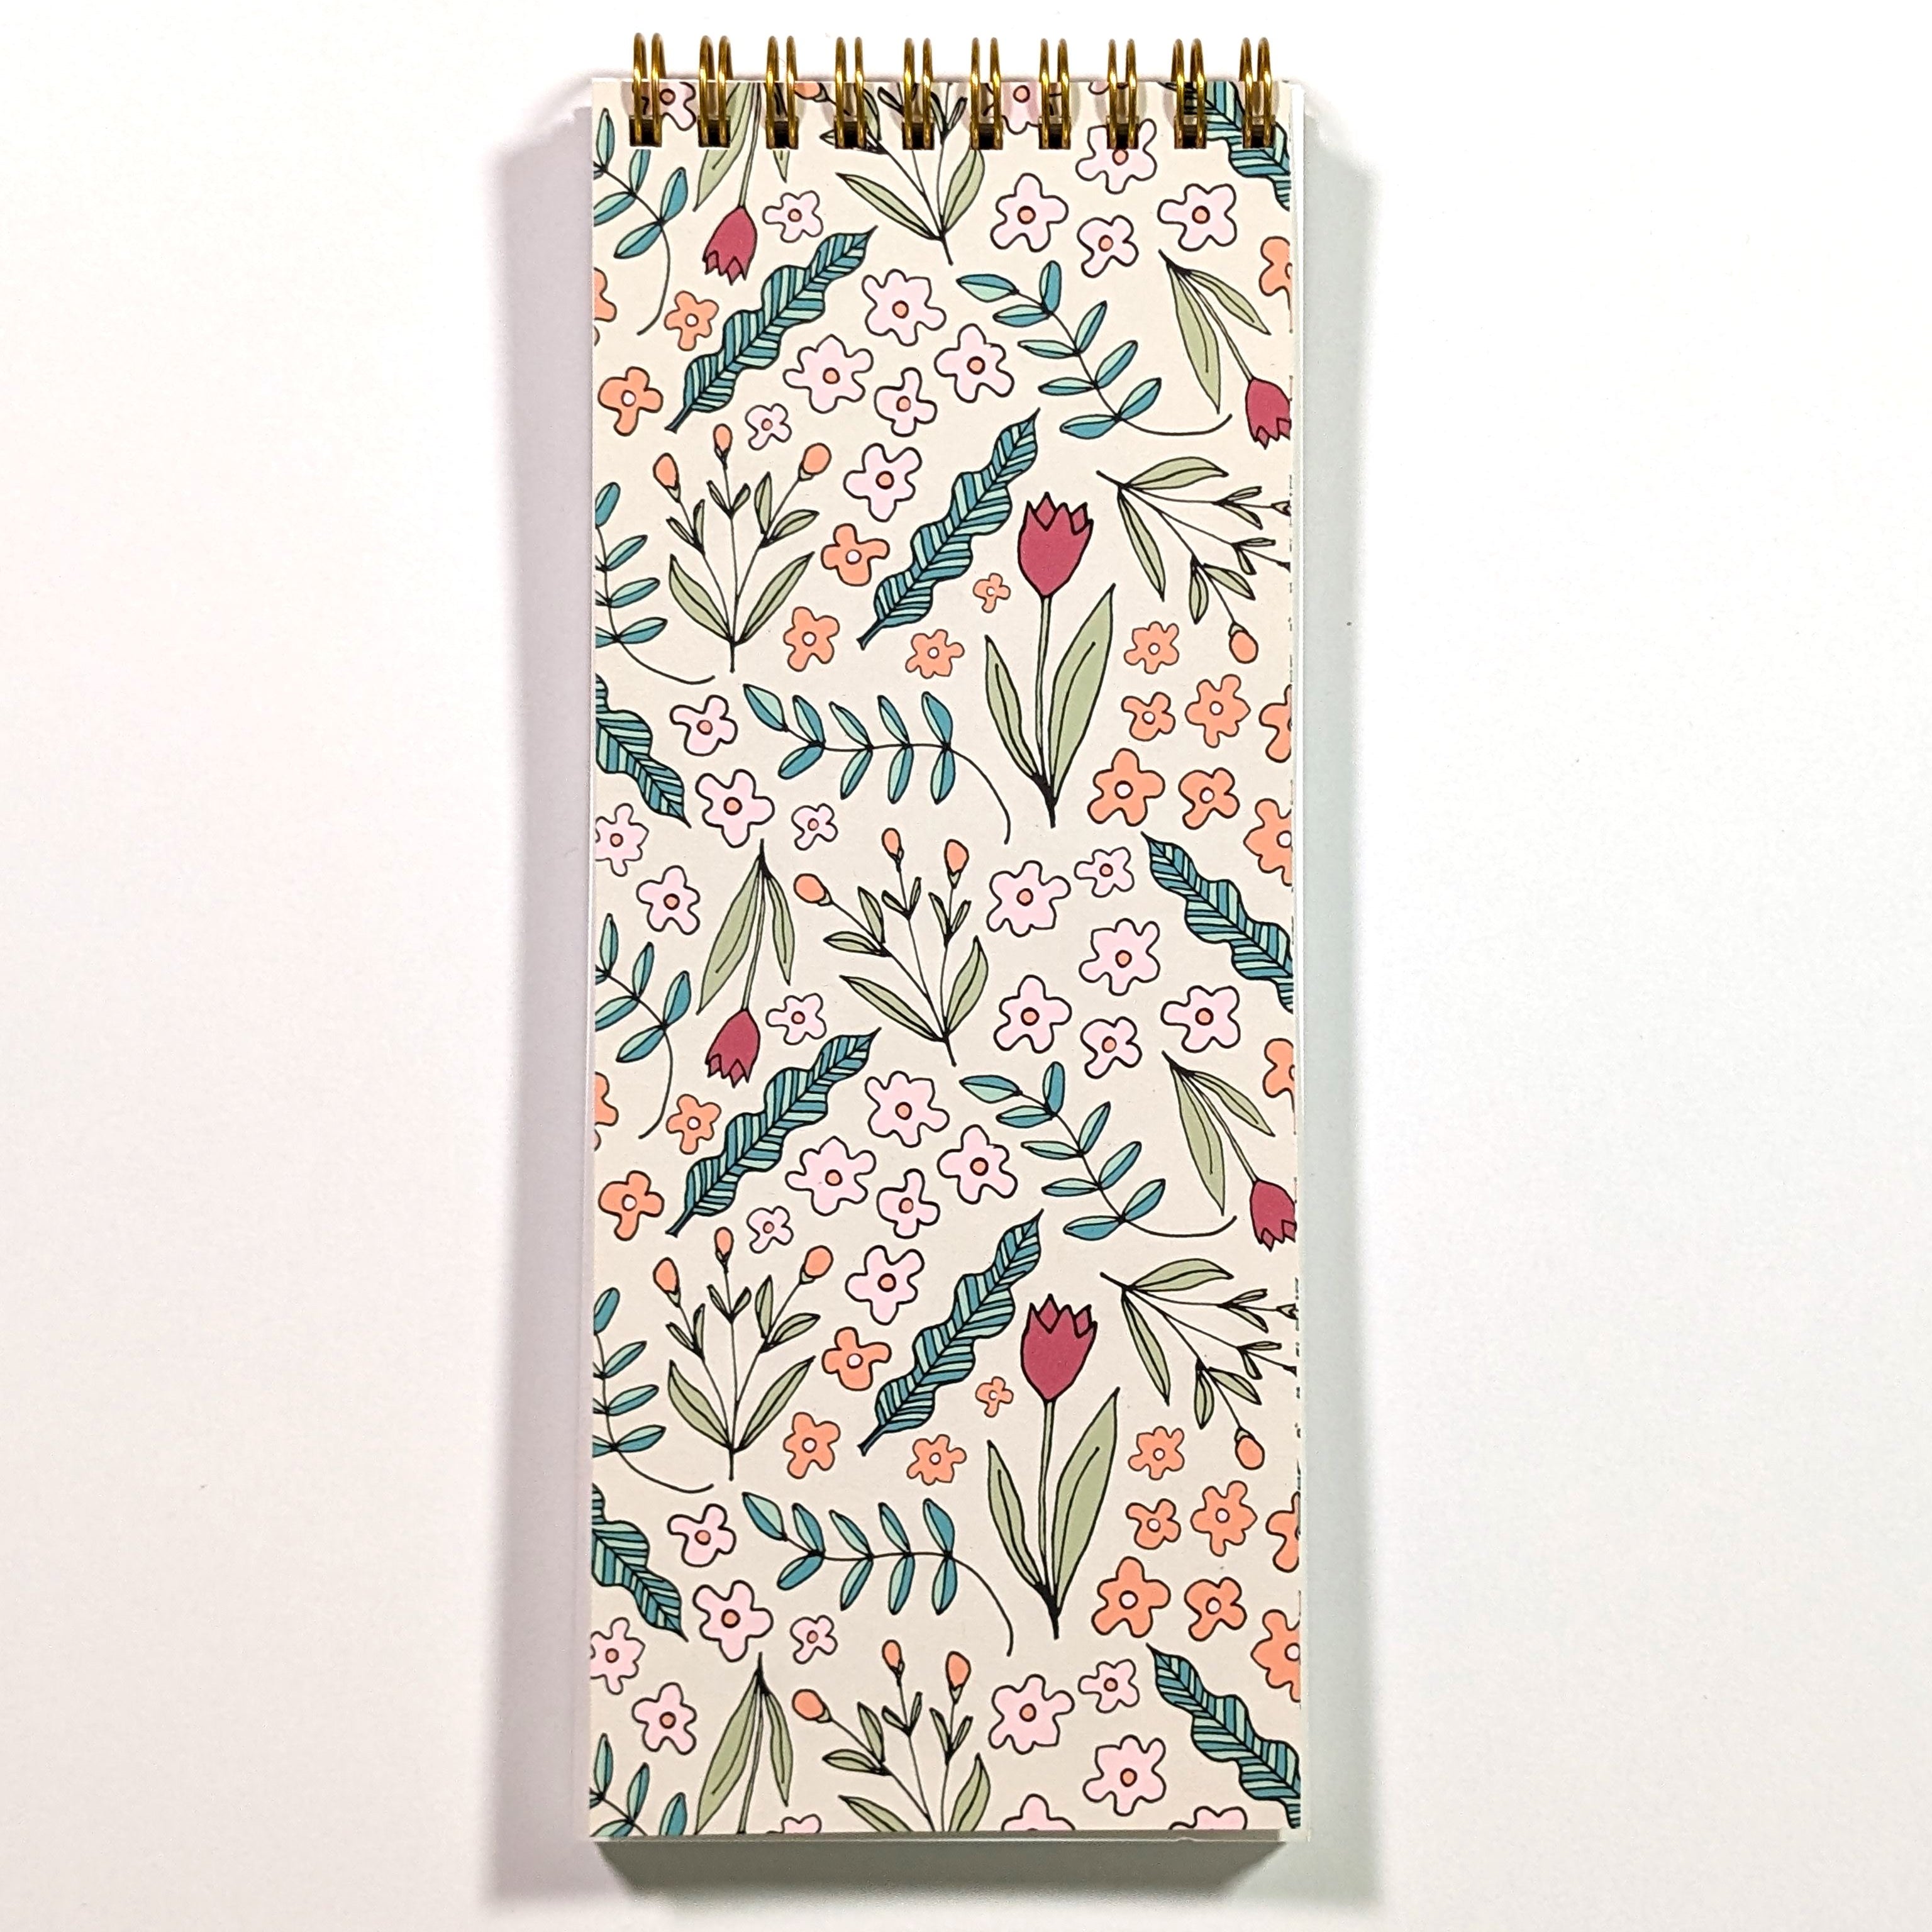 Doodle Floral Top Spiral To-Do List Notebook Notebooks Lucid Moon Studio 